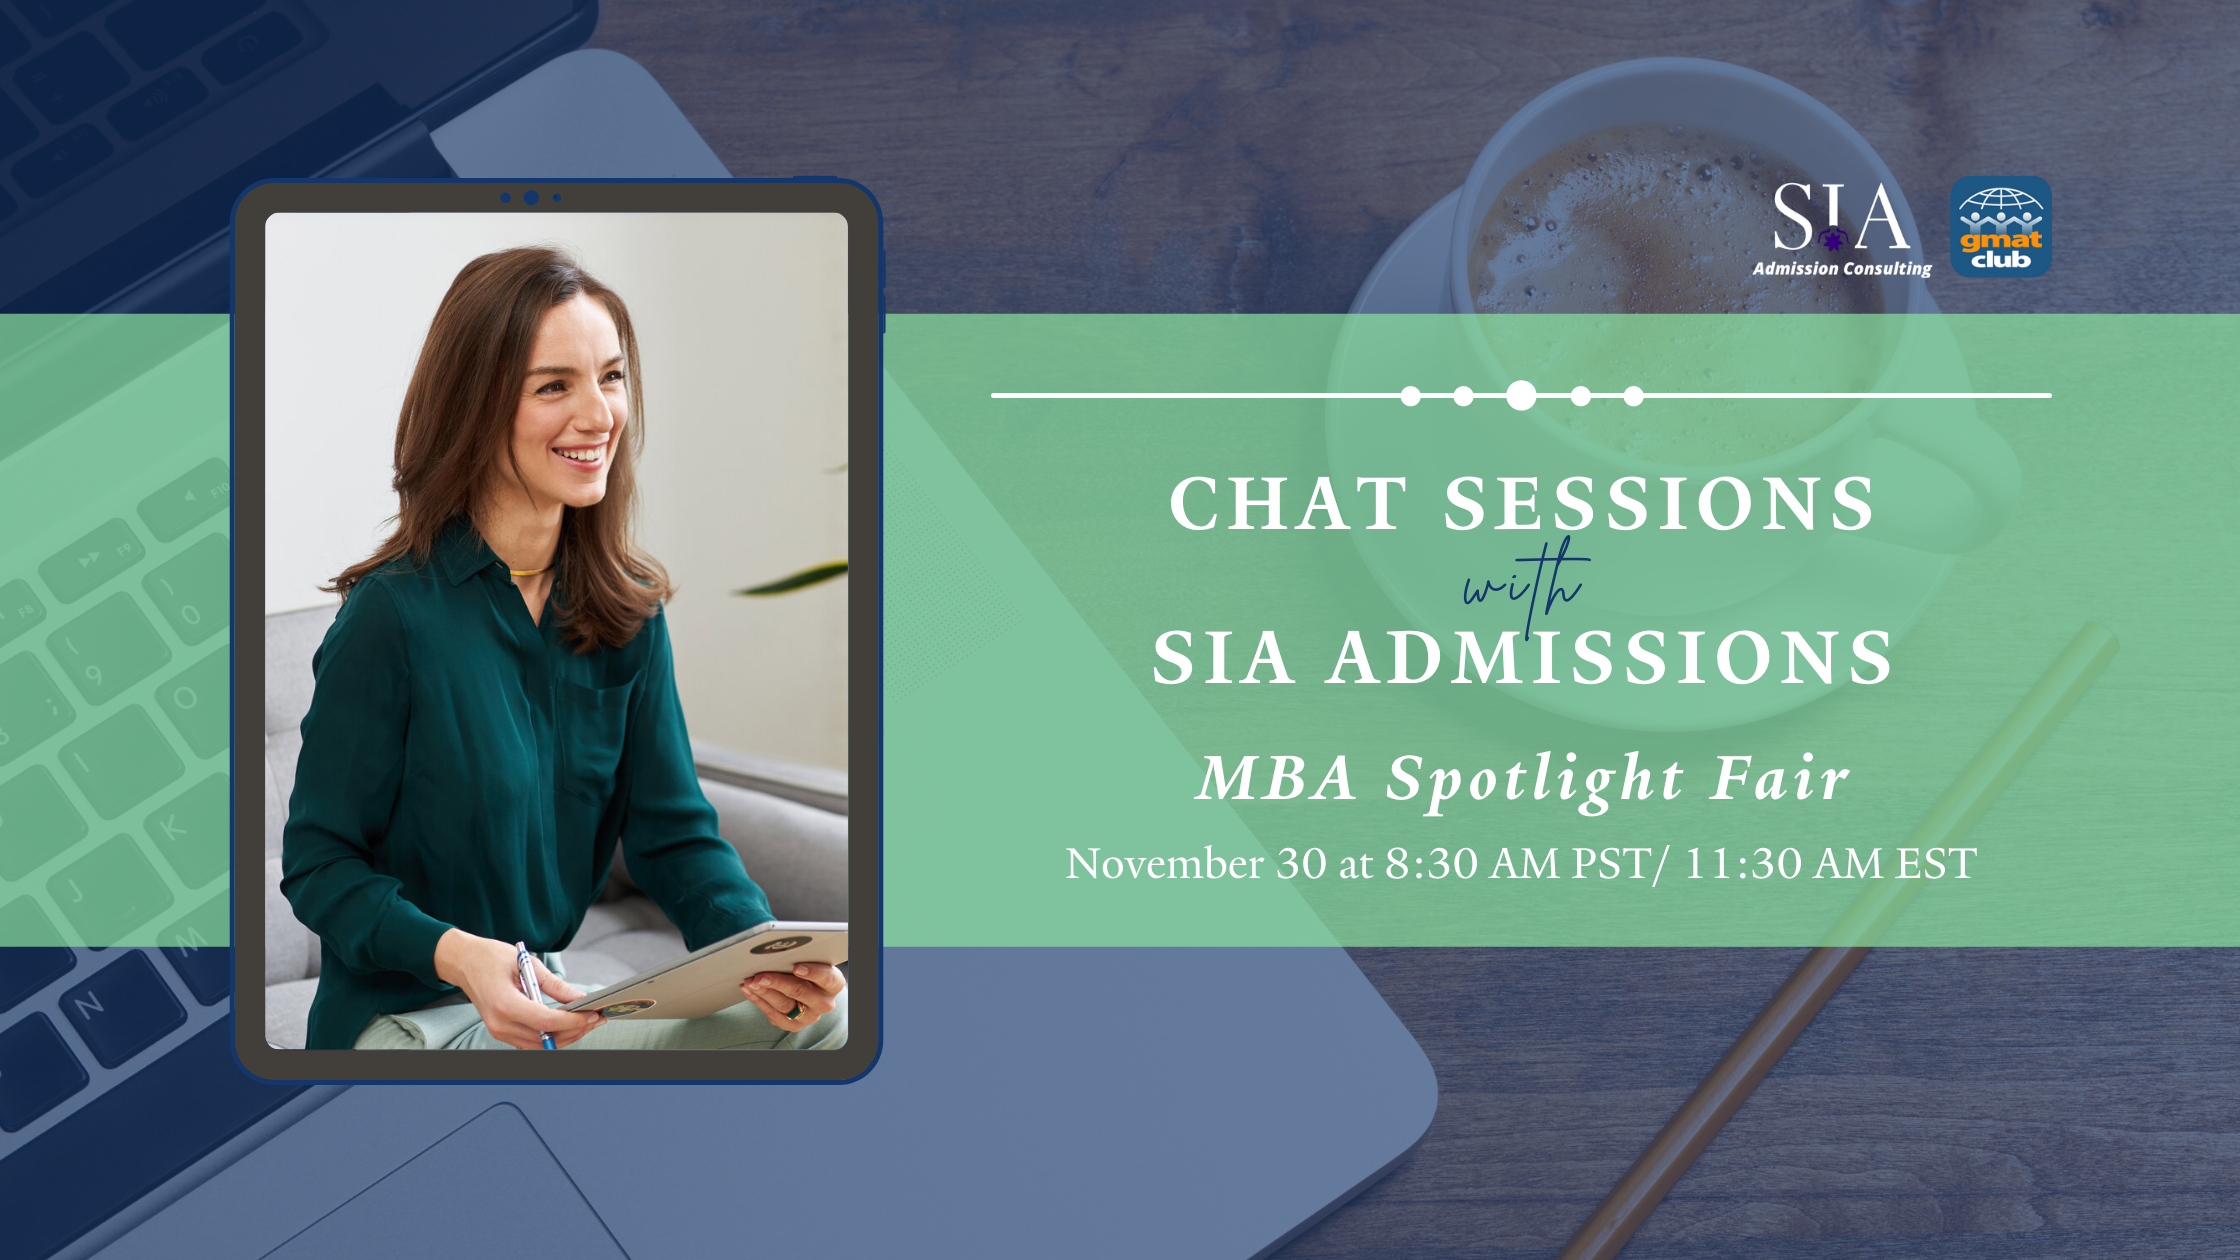 Sia Admissions - MBA Spotlight Fair: Q&A Sessions with Sia Admissions